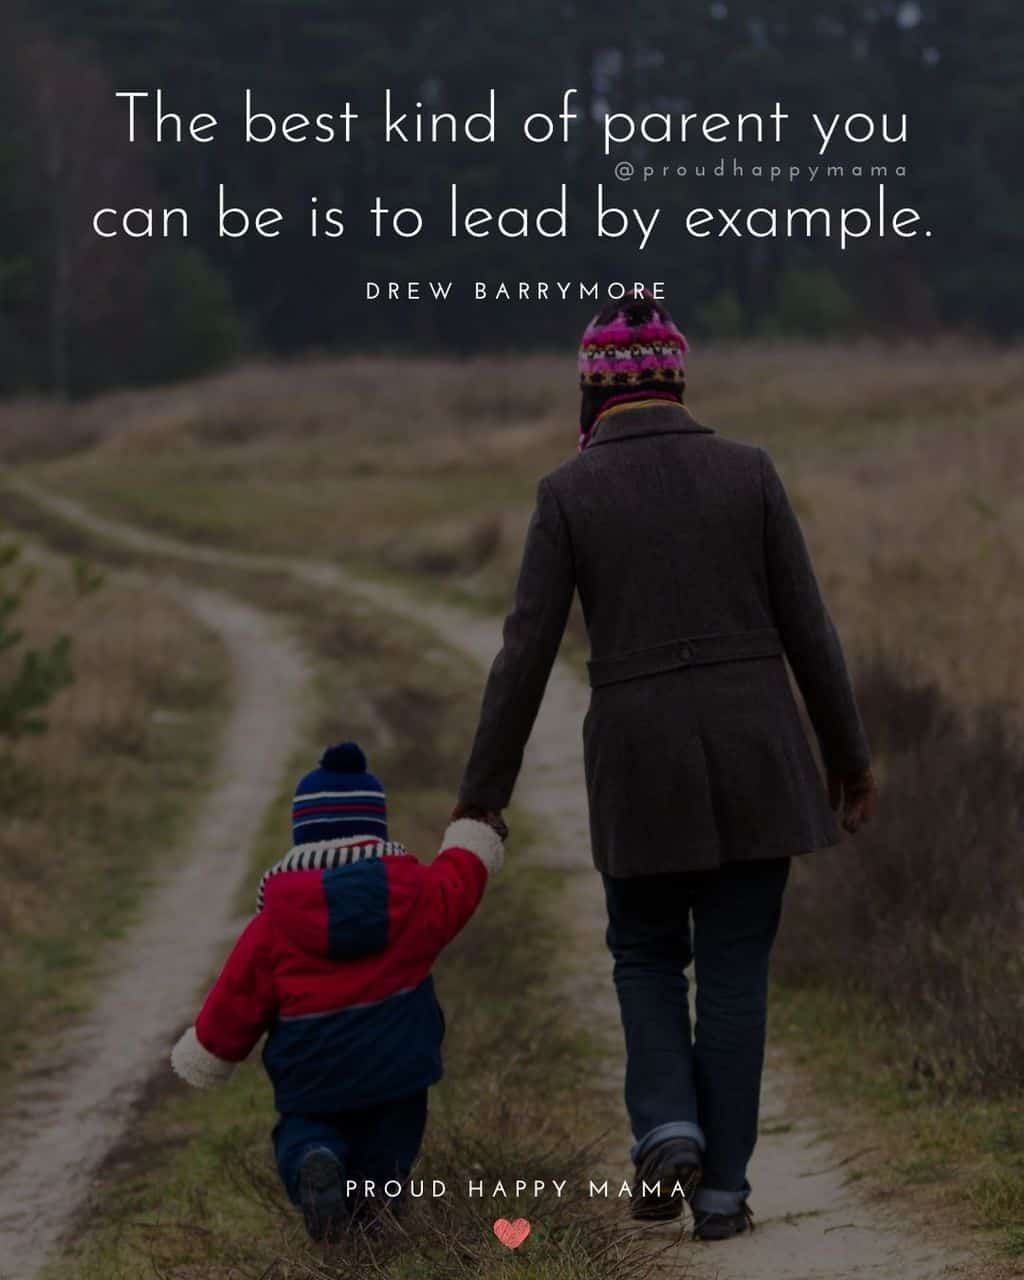 Parenting Quotes - The best kind of parent you can be is to lead by example.’ – Drew Barrymore